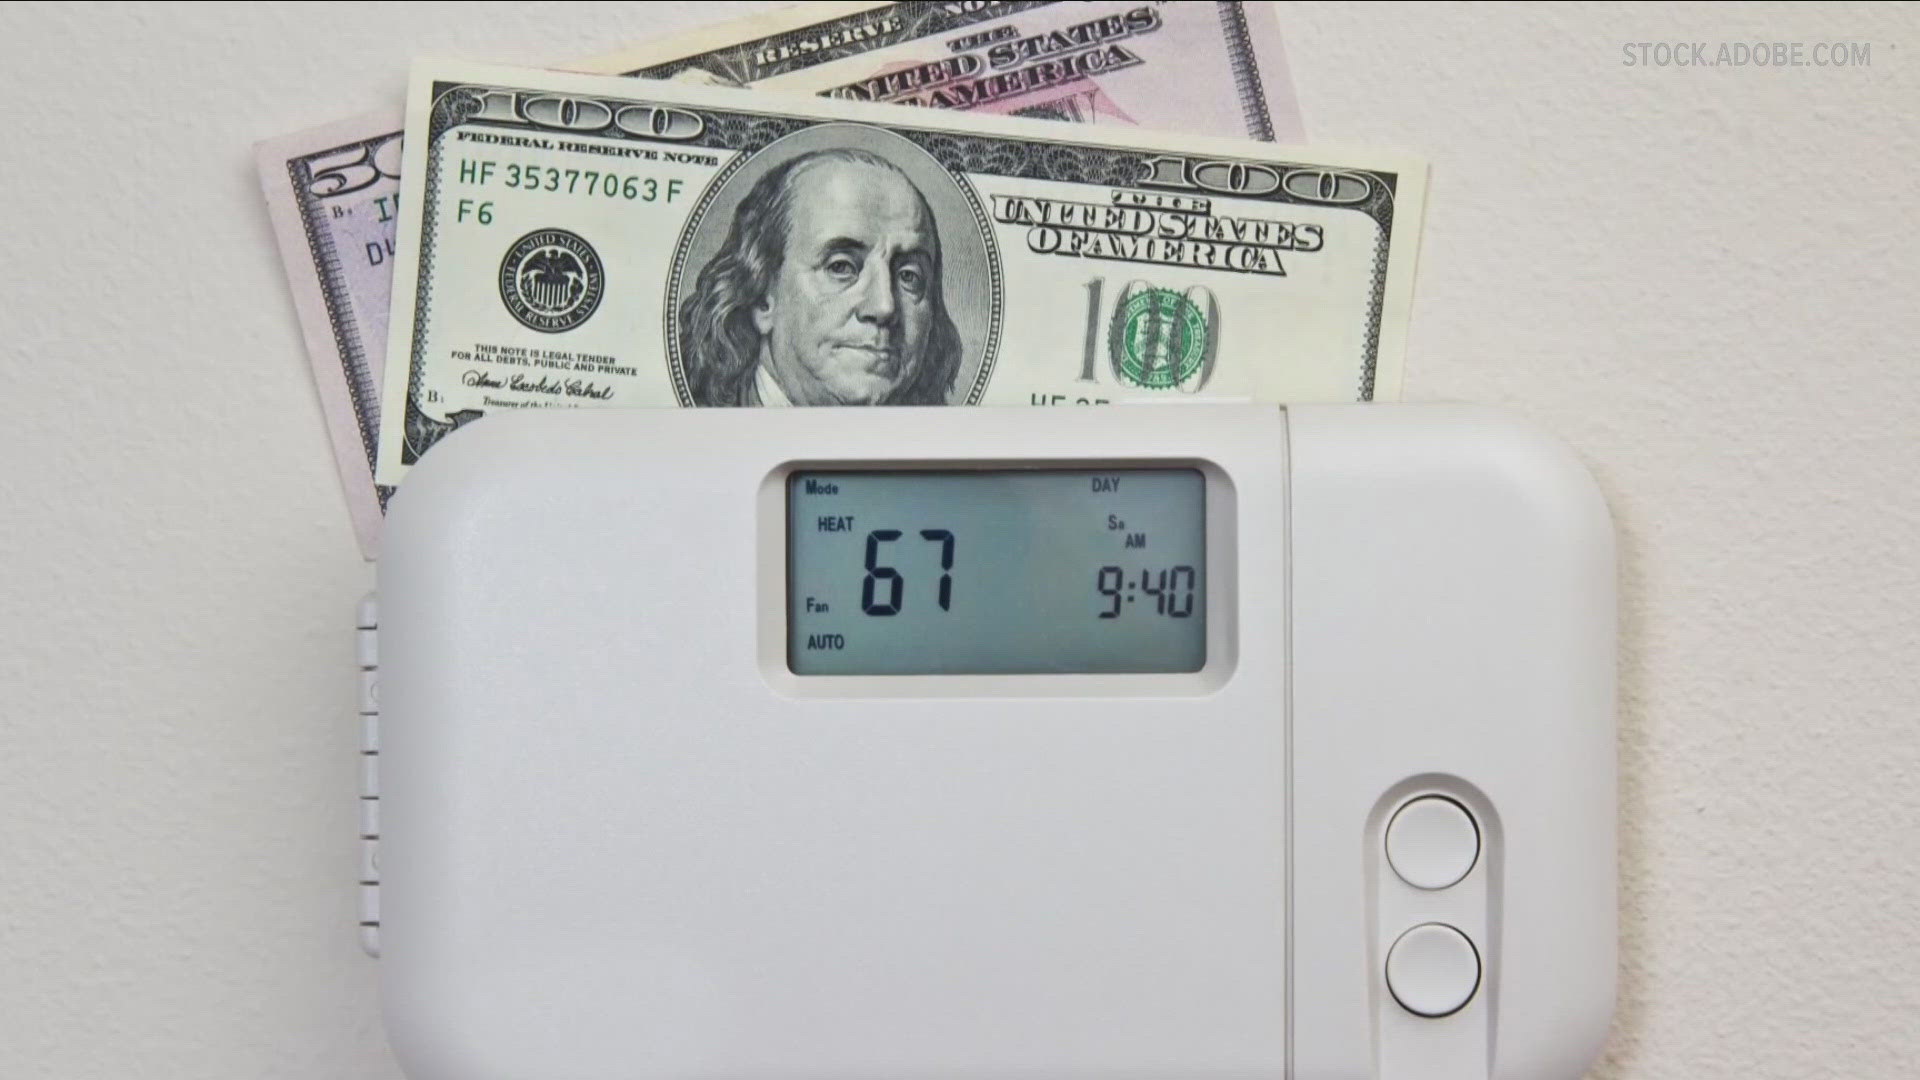 AS THE TEMPERATURES RISE... RAISING YOUR THERMOSTAT BY JUST ONE DEGREE CAN PUT LESS STRESS ON YOUR COOLING SYSTEM.